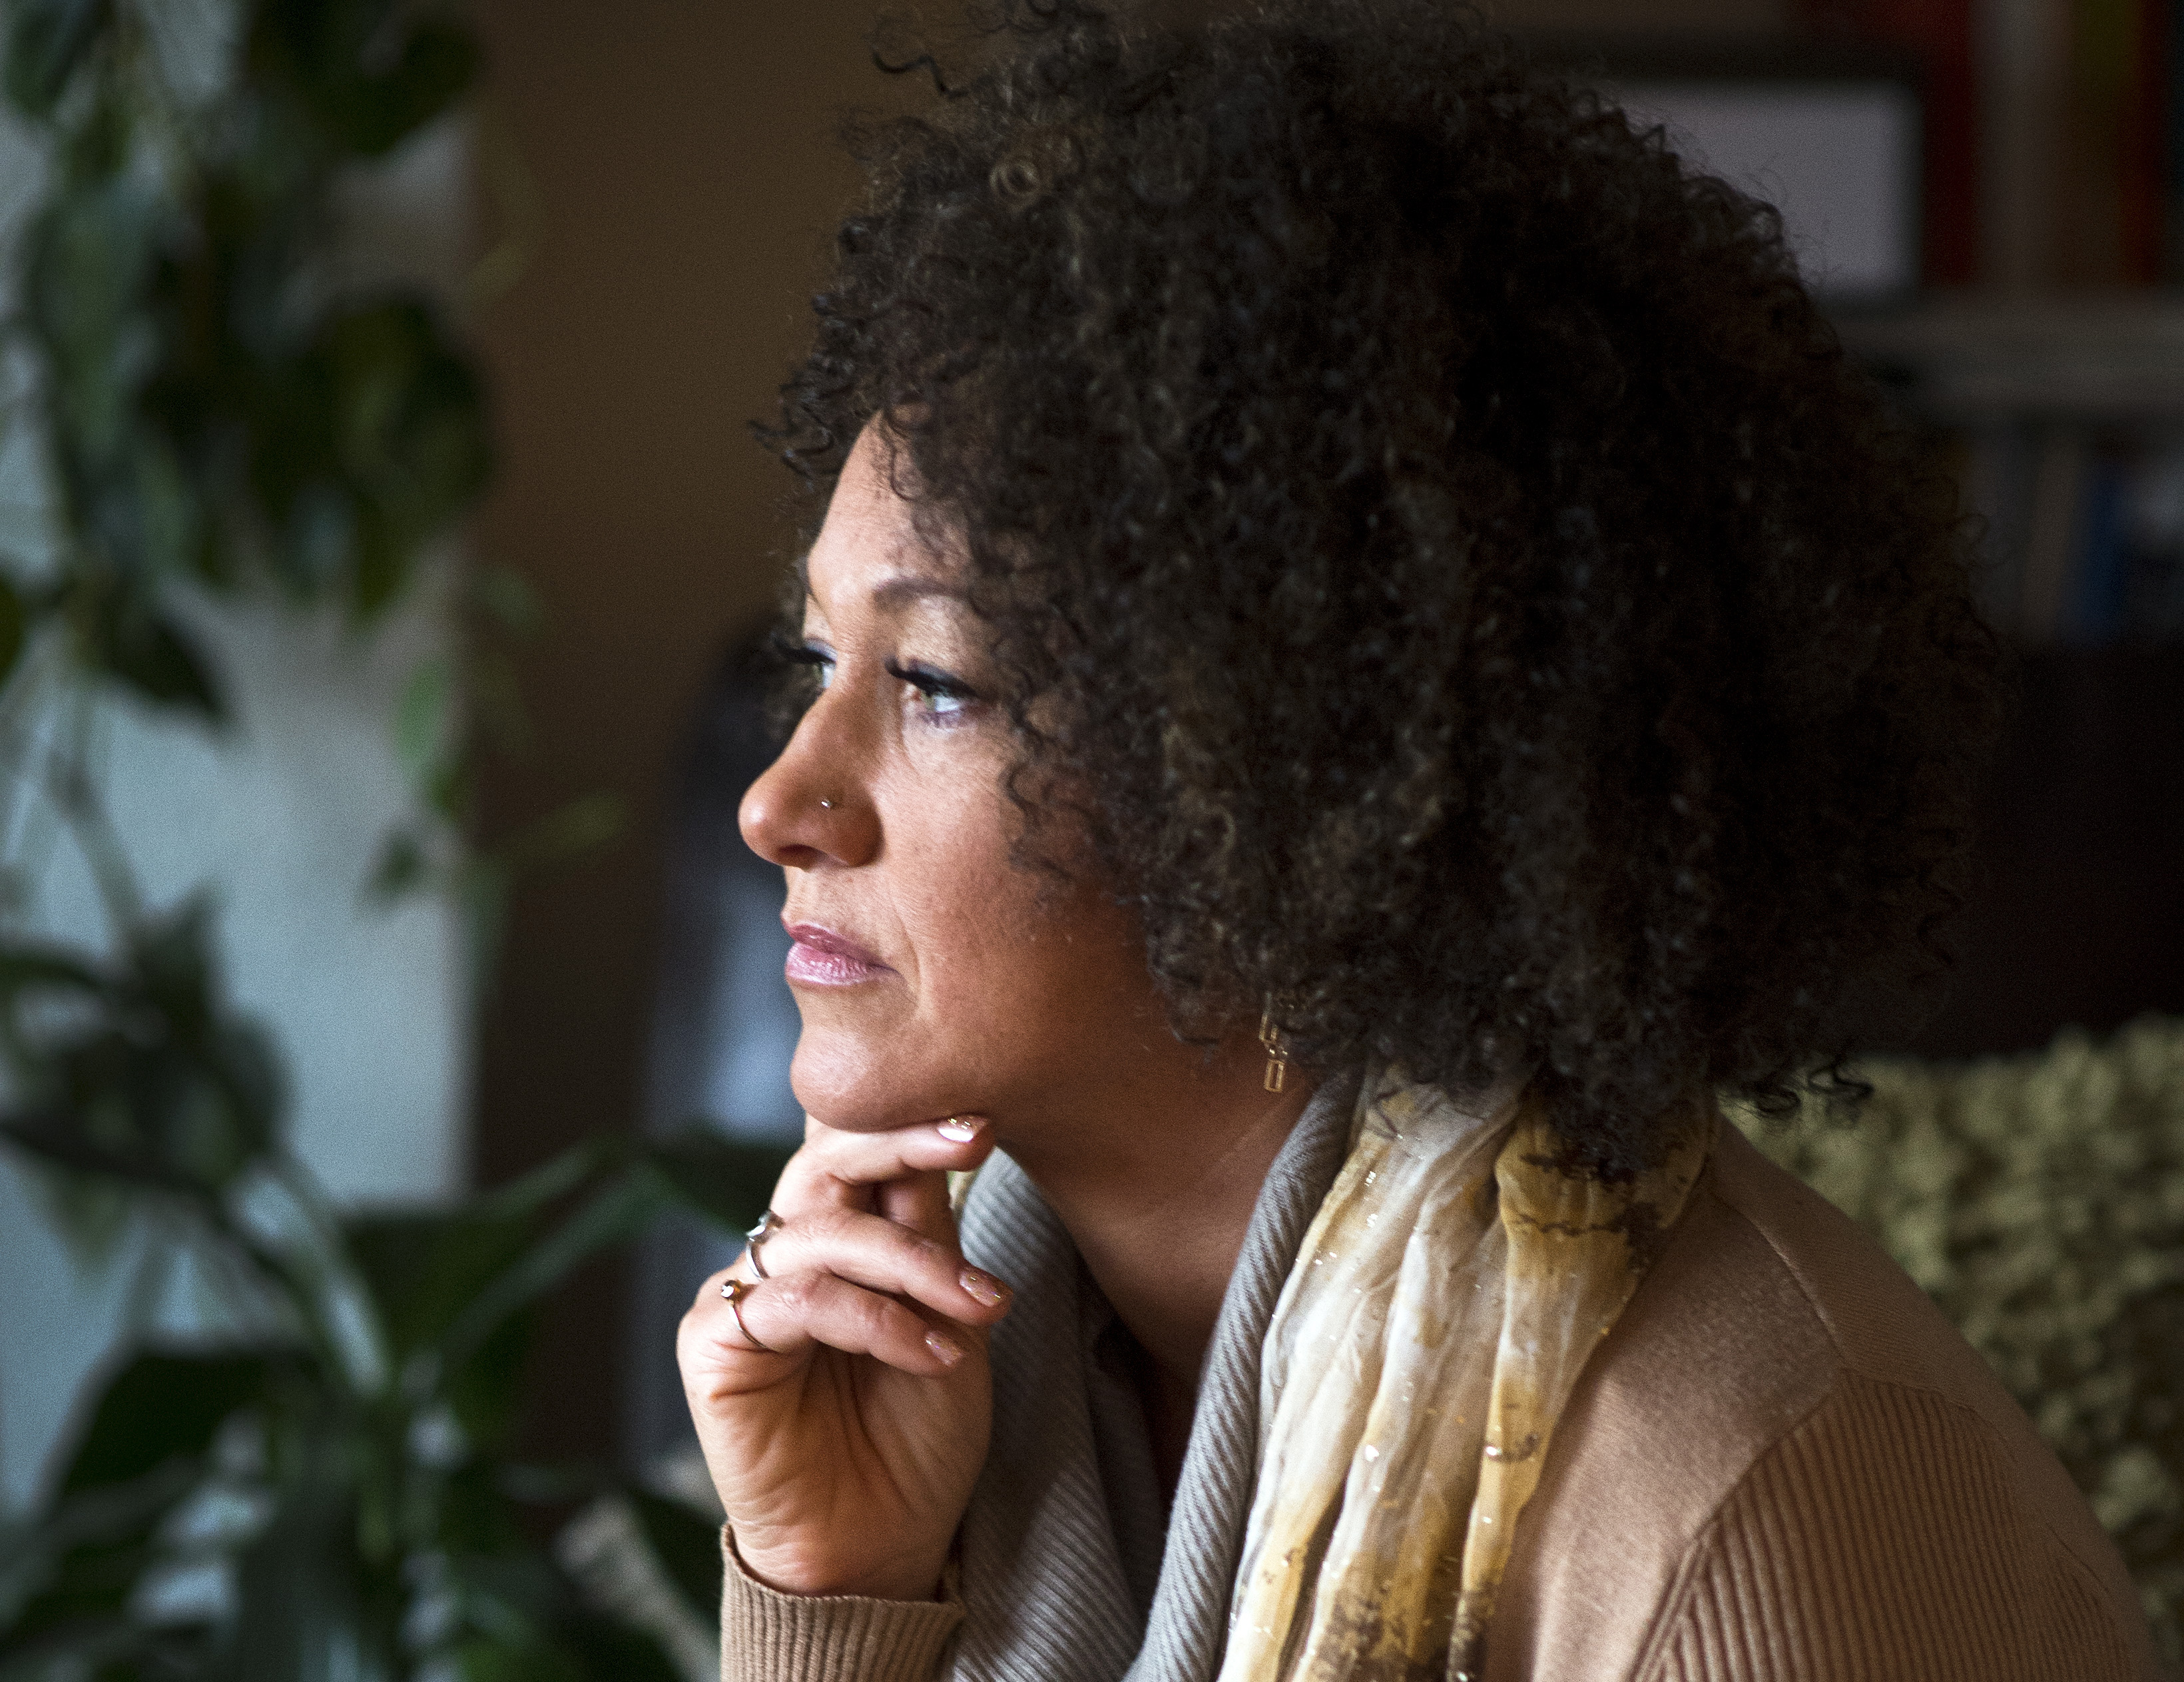 Rachel Dolezal, president of the Spokane chapter of the NAACP, poses for a photo in her Spokane, Wash. home on March 2, 2015.